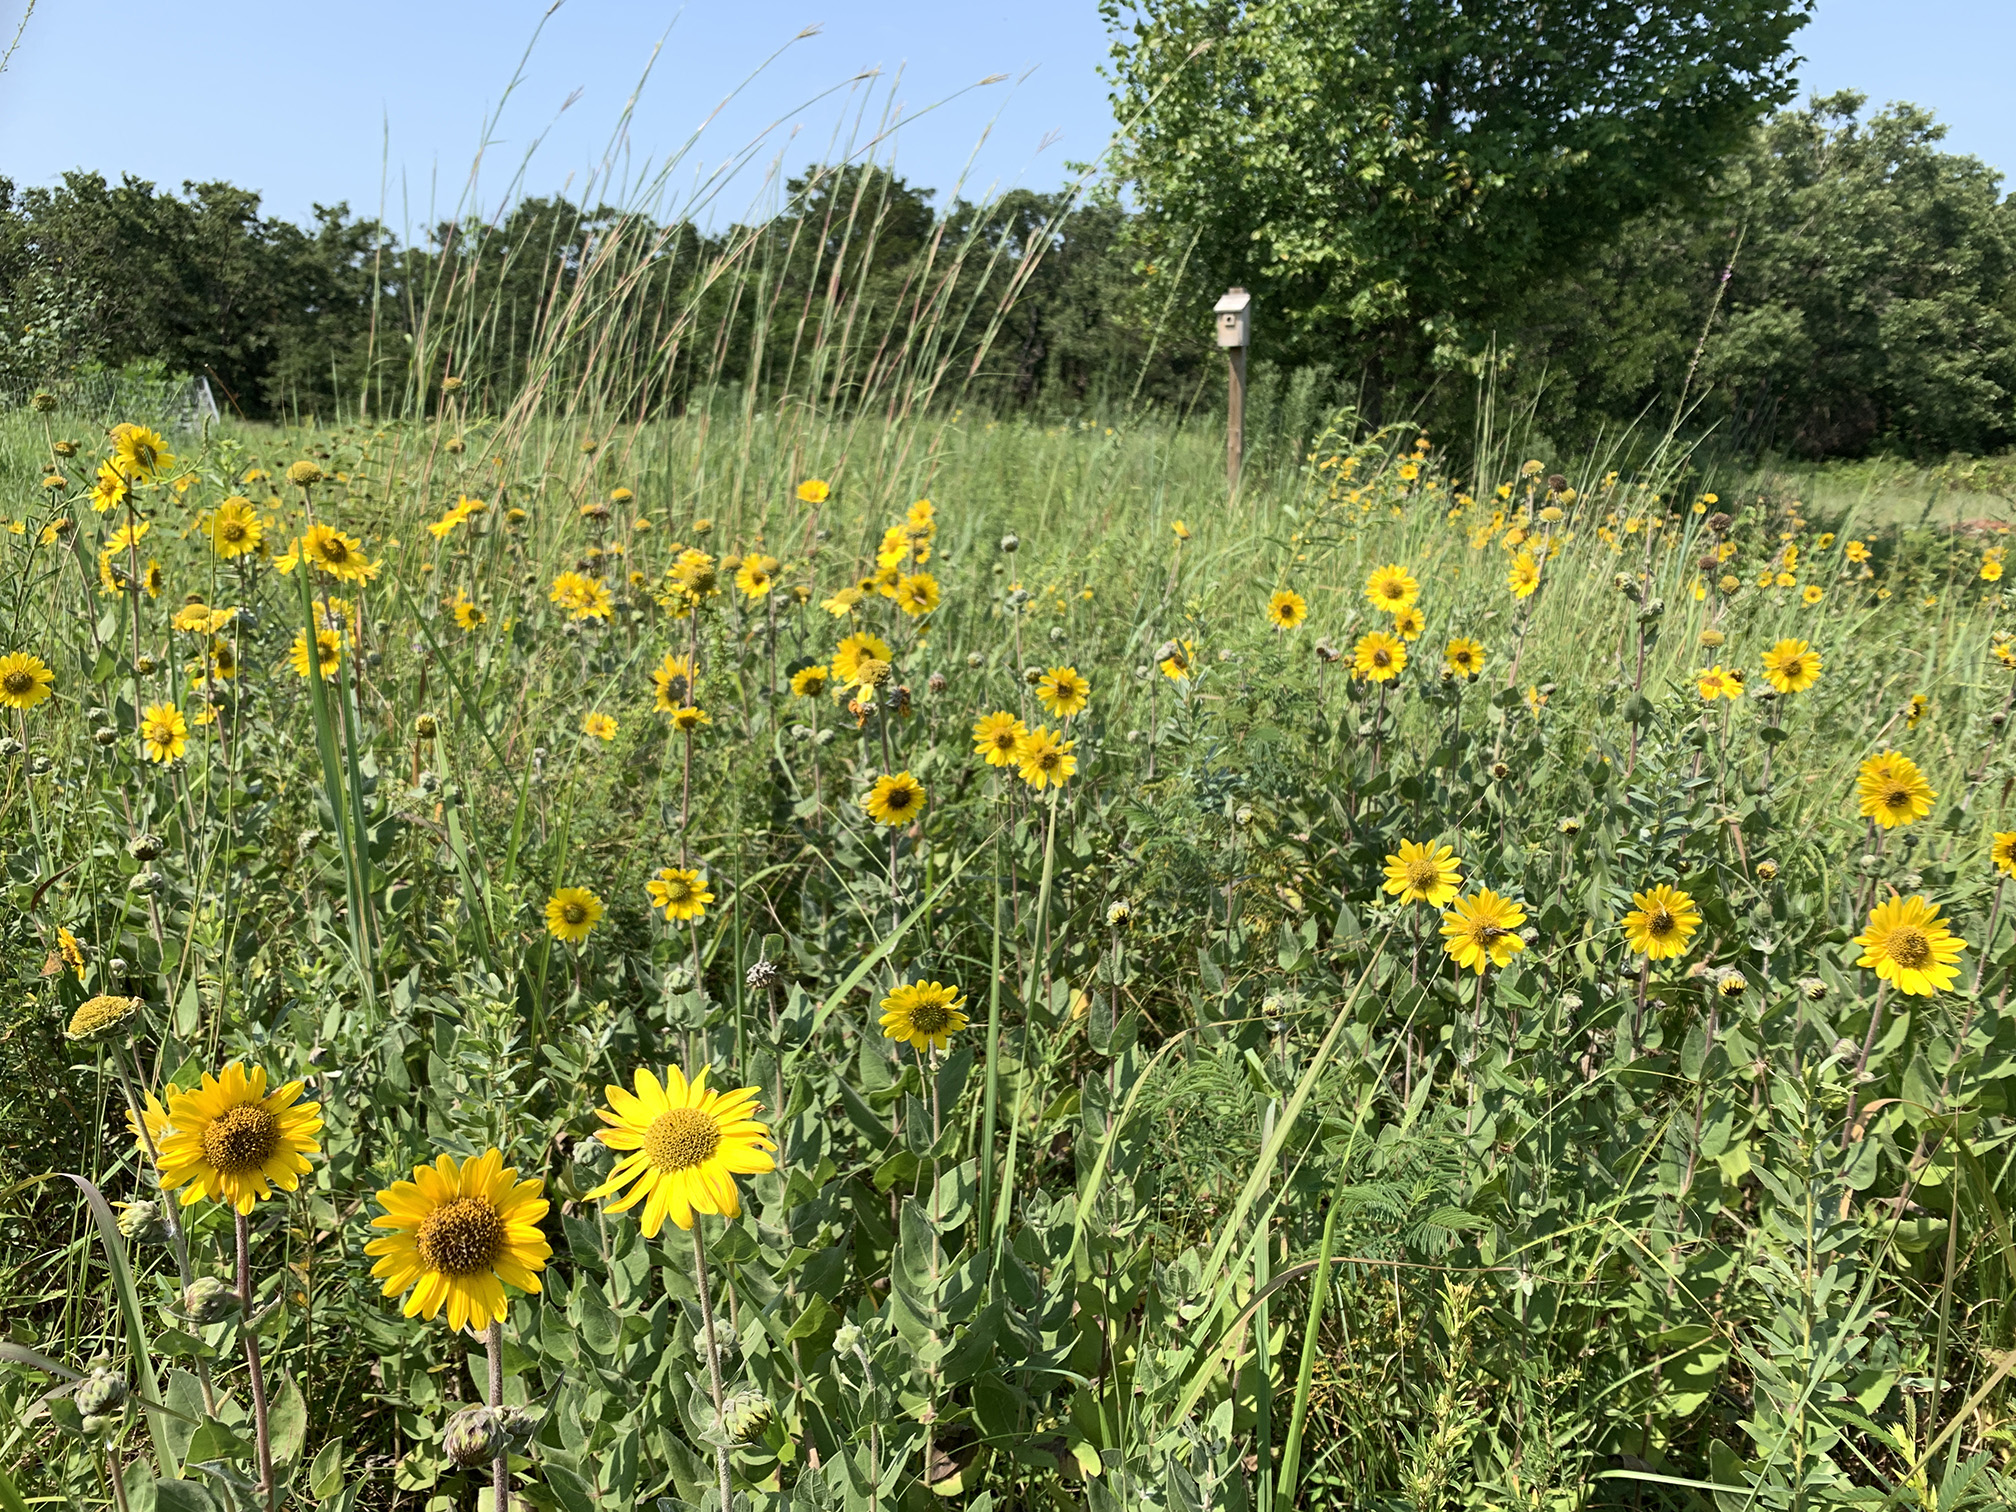 The prairie is full of tall yellow flowers. The flowers have green leaves, brown stems, and flowers that have bright yellow petals in a ring around a darker yellow center.